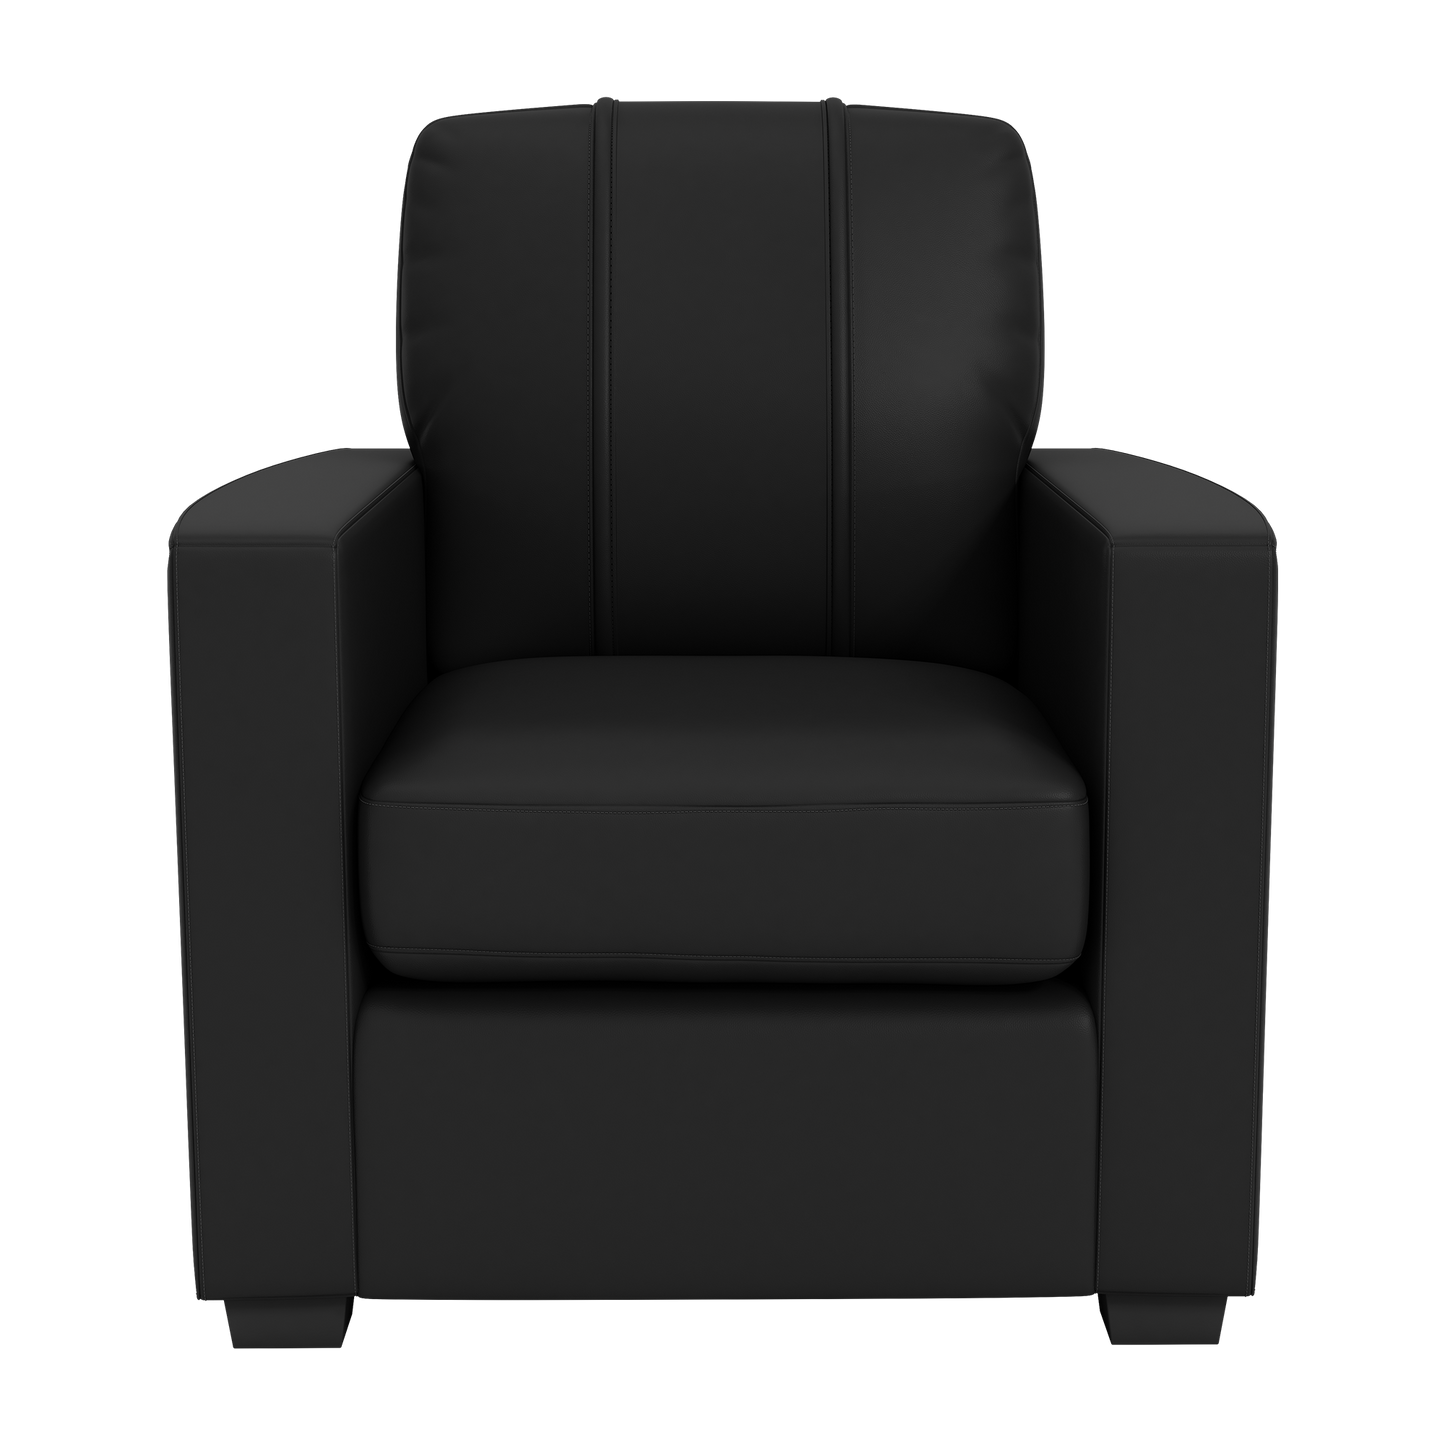 Silver Club Chair with  Cincinnati Bengals Secondary Logo